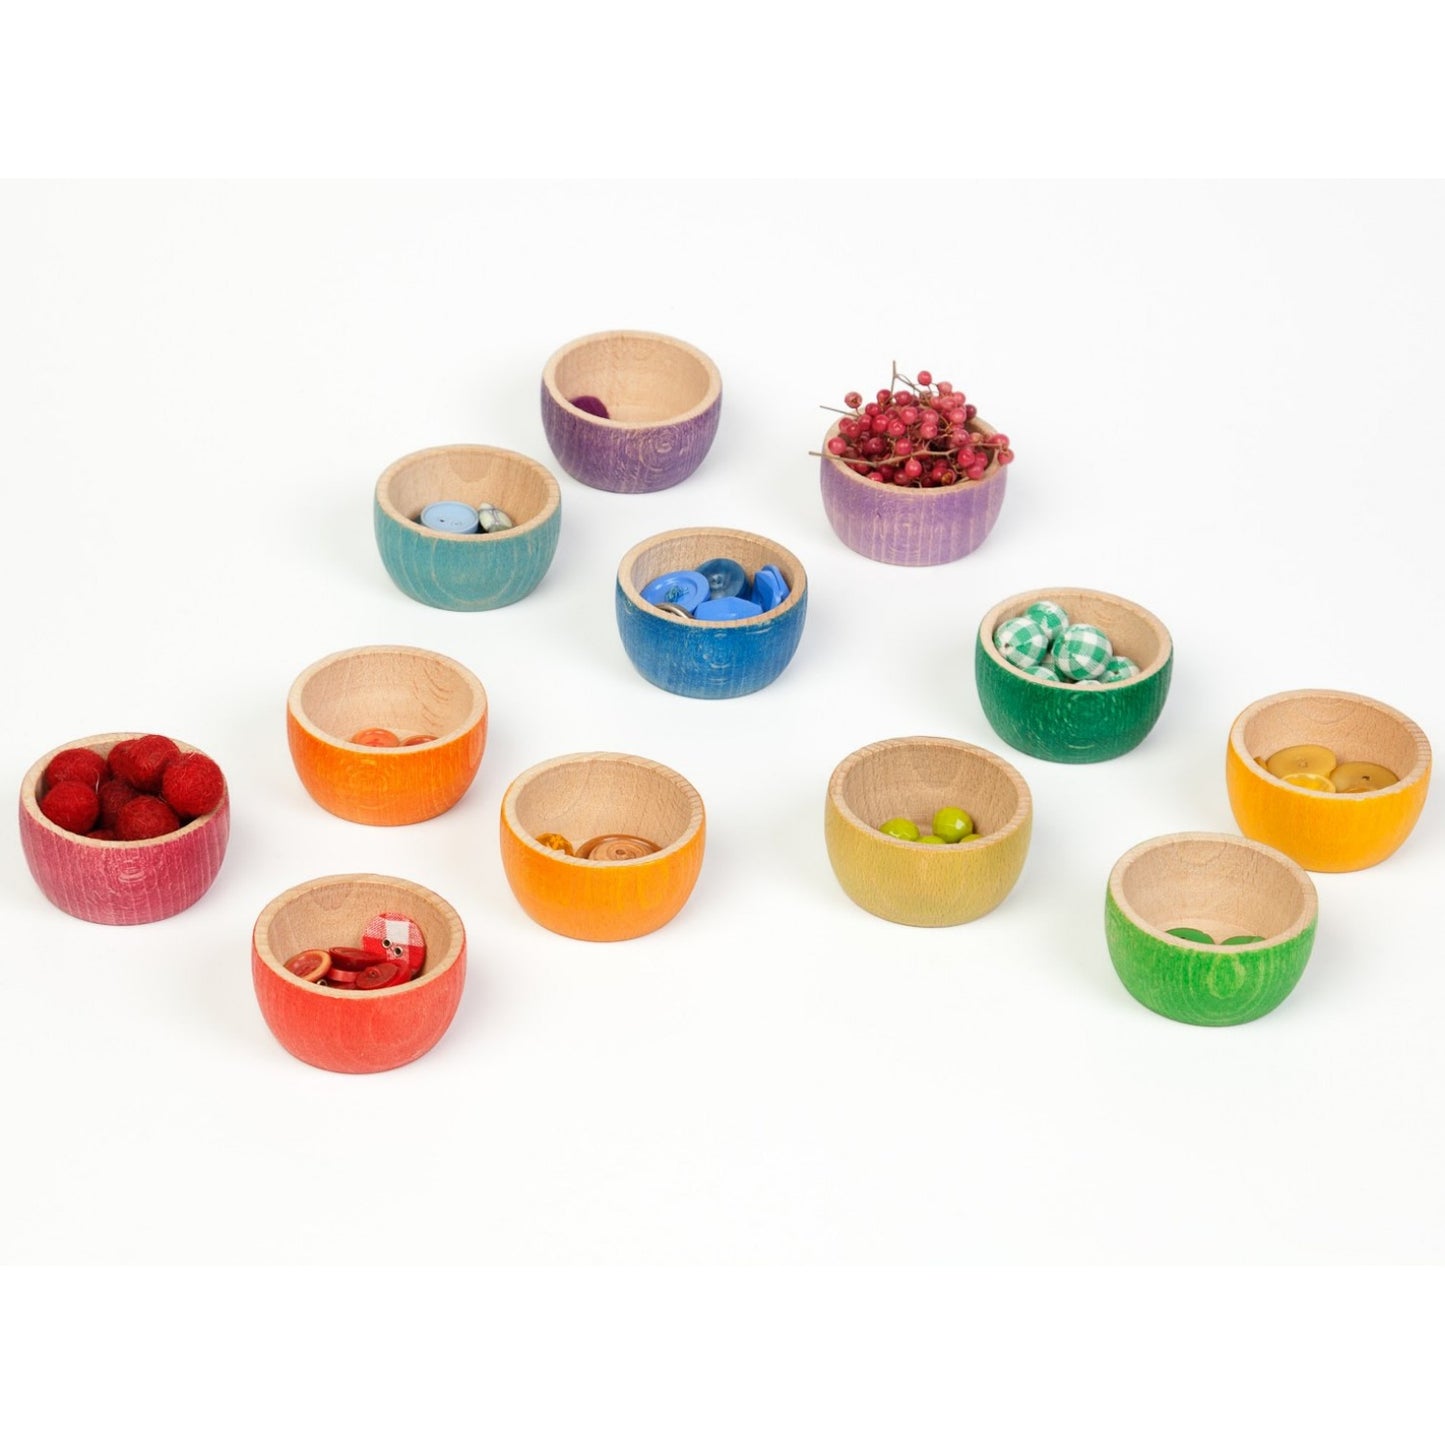 Grapat 12 Bowls | Wooden Toys for Kids | Open-Ended Play Set | Front View: Bowls Filled with Items | BeoVERDE.ie